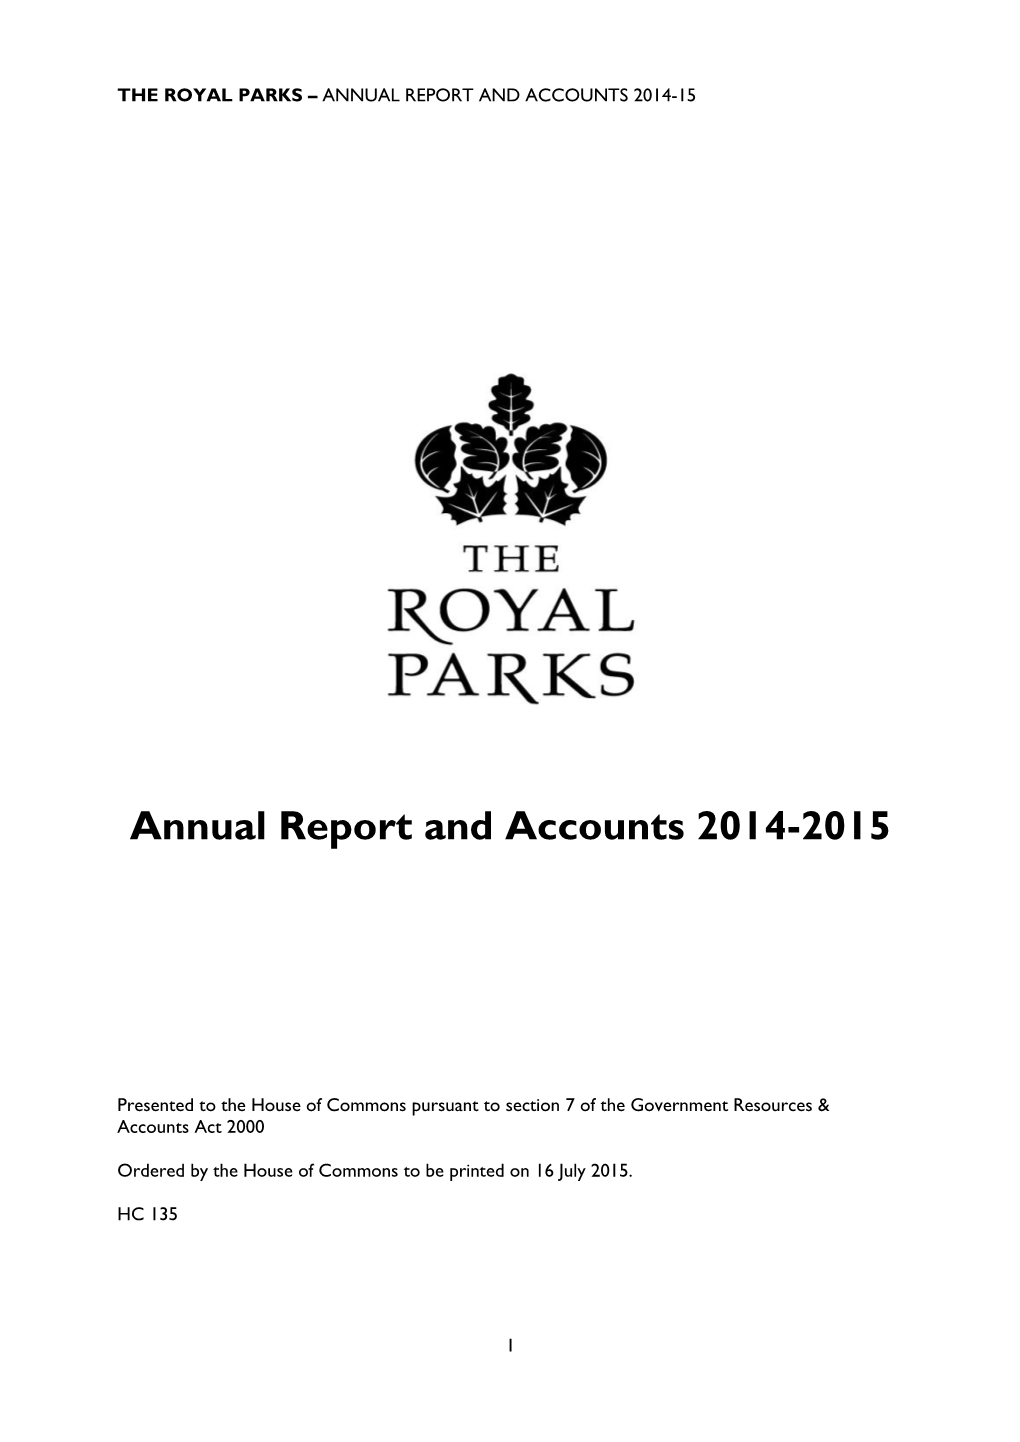 Annual Report and Accounts 2014-15